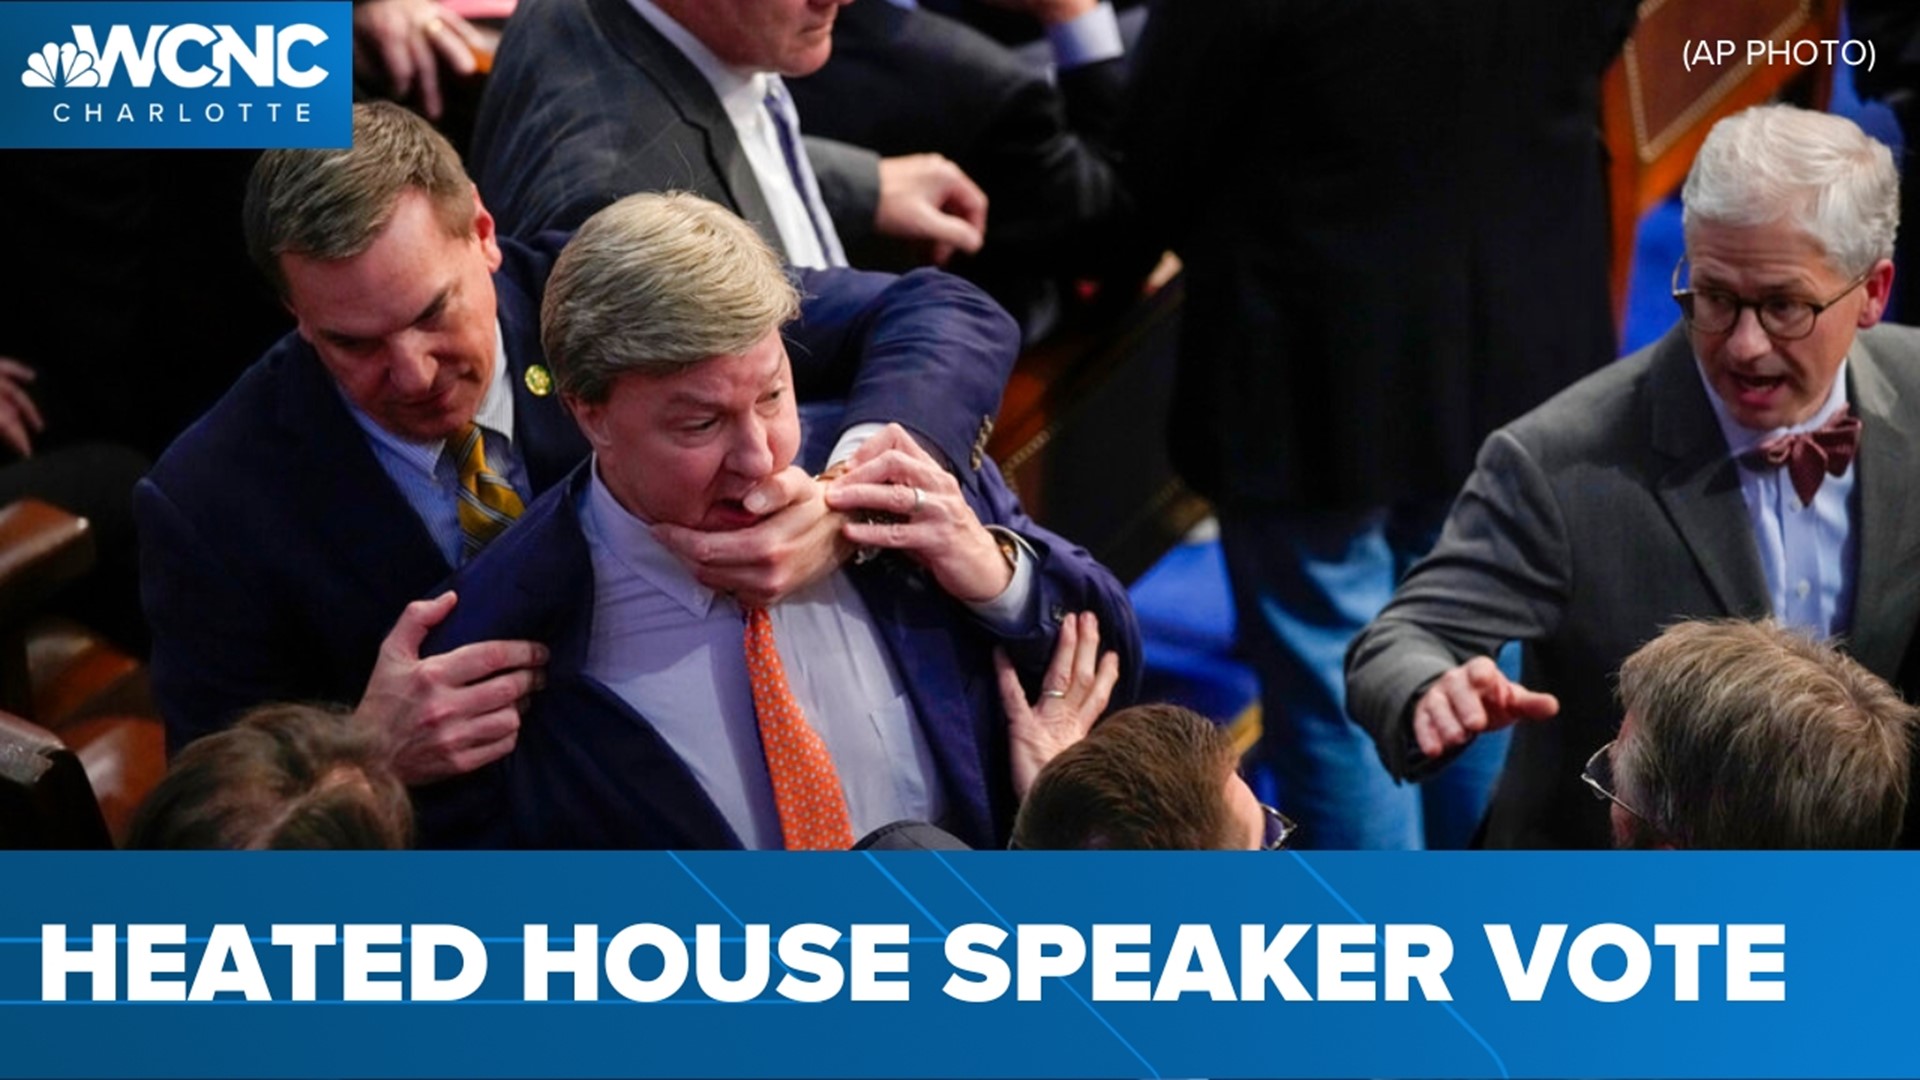 At one point, Rep. Mike Rogers, while shouting, got closer to Gaetz before Hudson physically pulled him back.